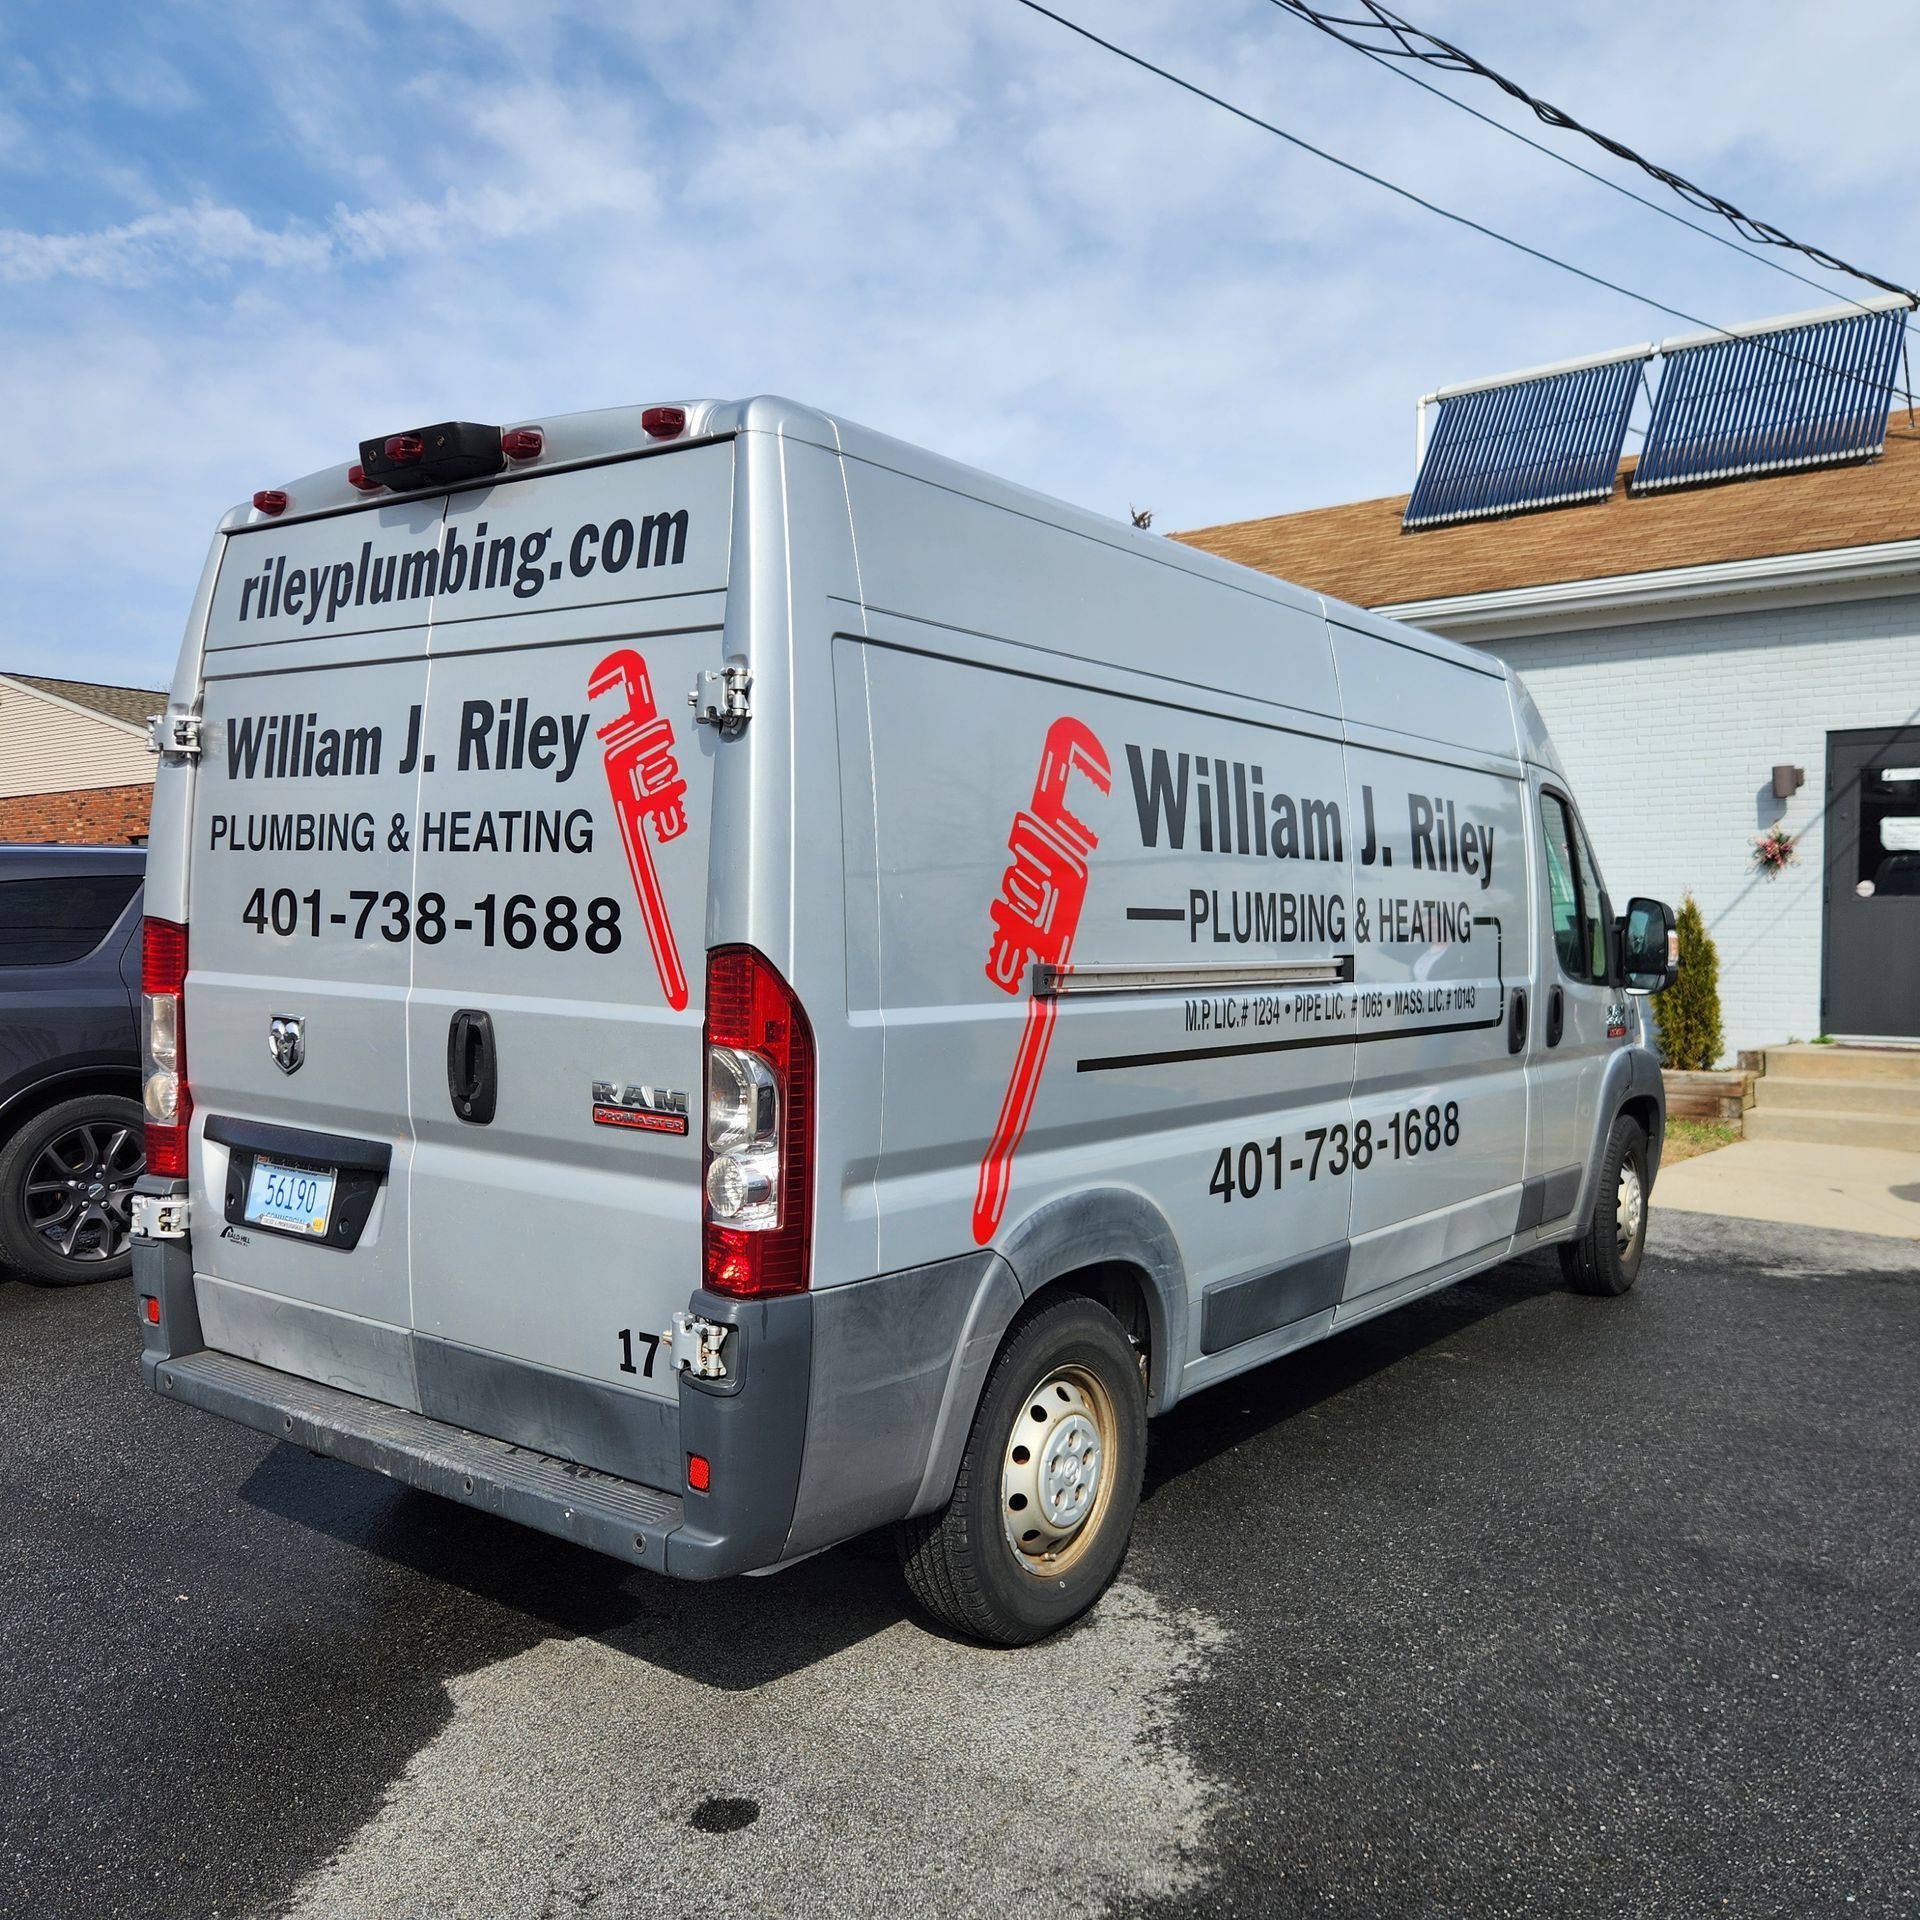 A william j. riley van is parked in front of a building